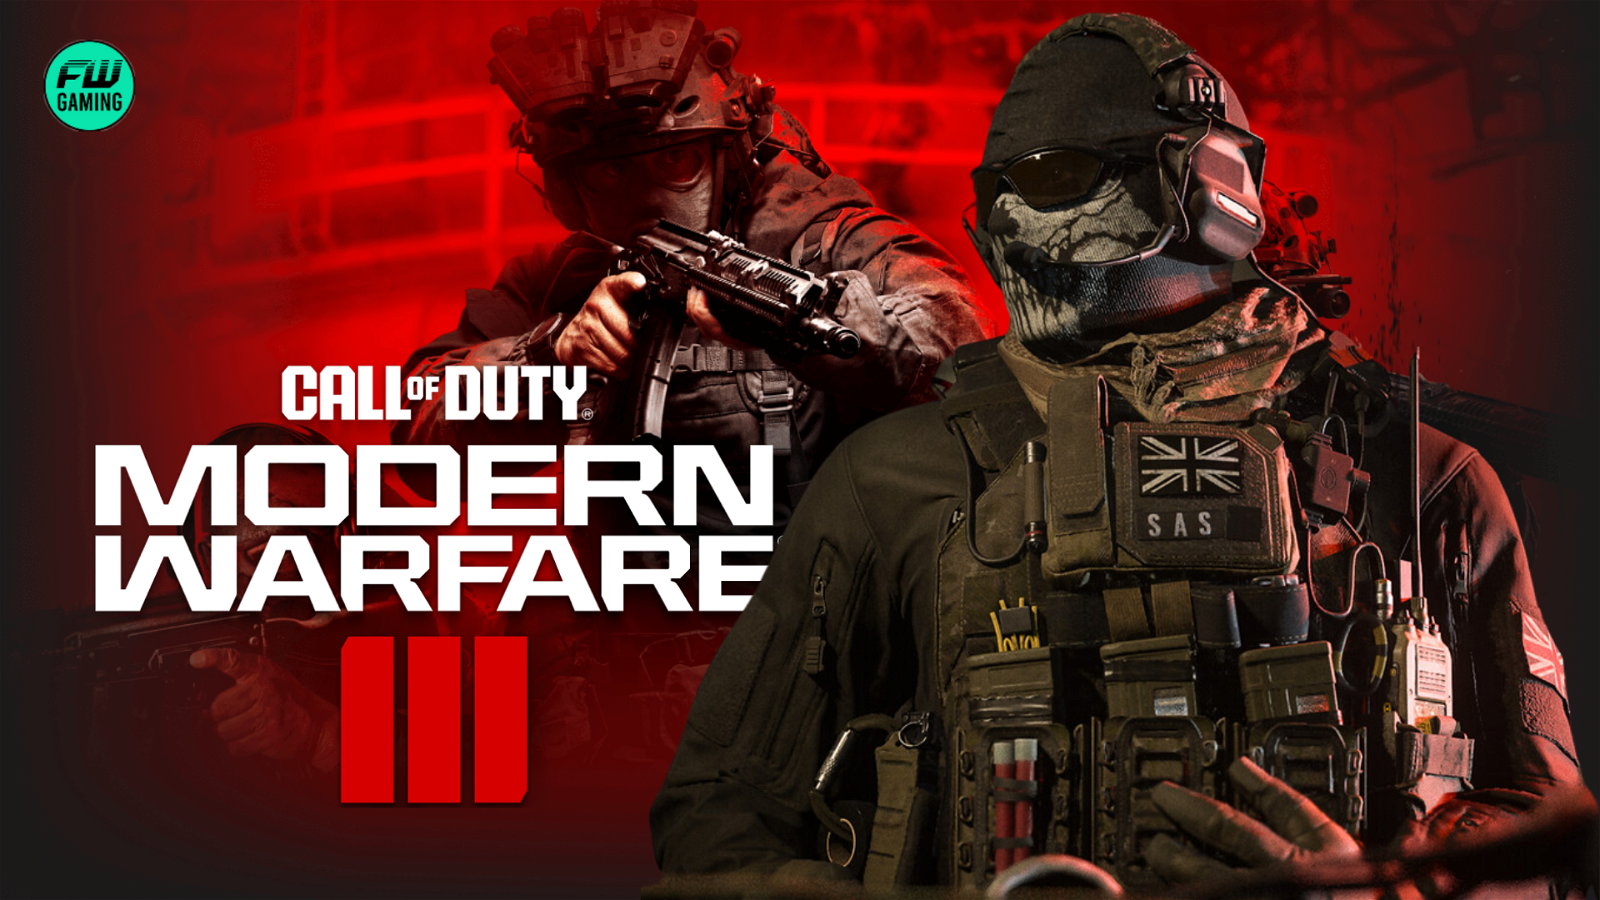 When is Ranked Play Coming to Call of Duty Modern Warfare 3? What is the  Ranked Play Mode? - News